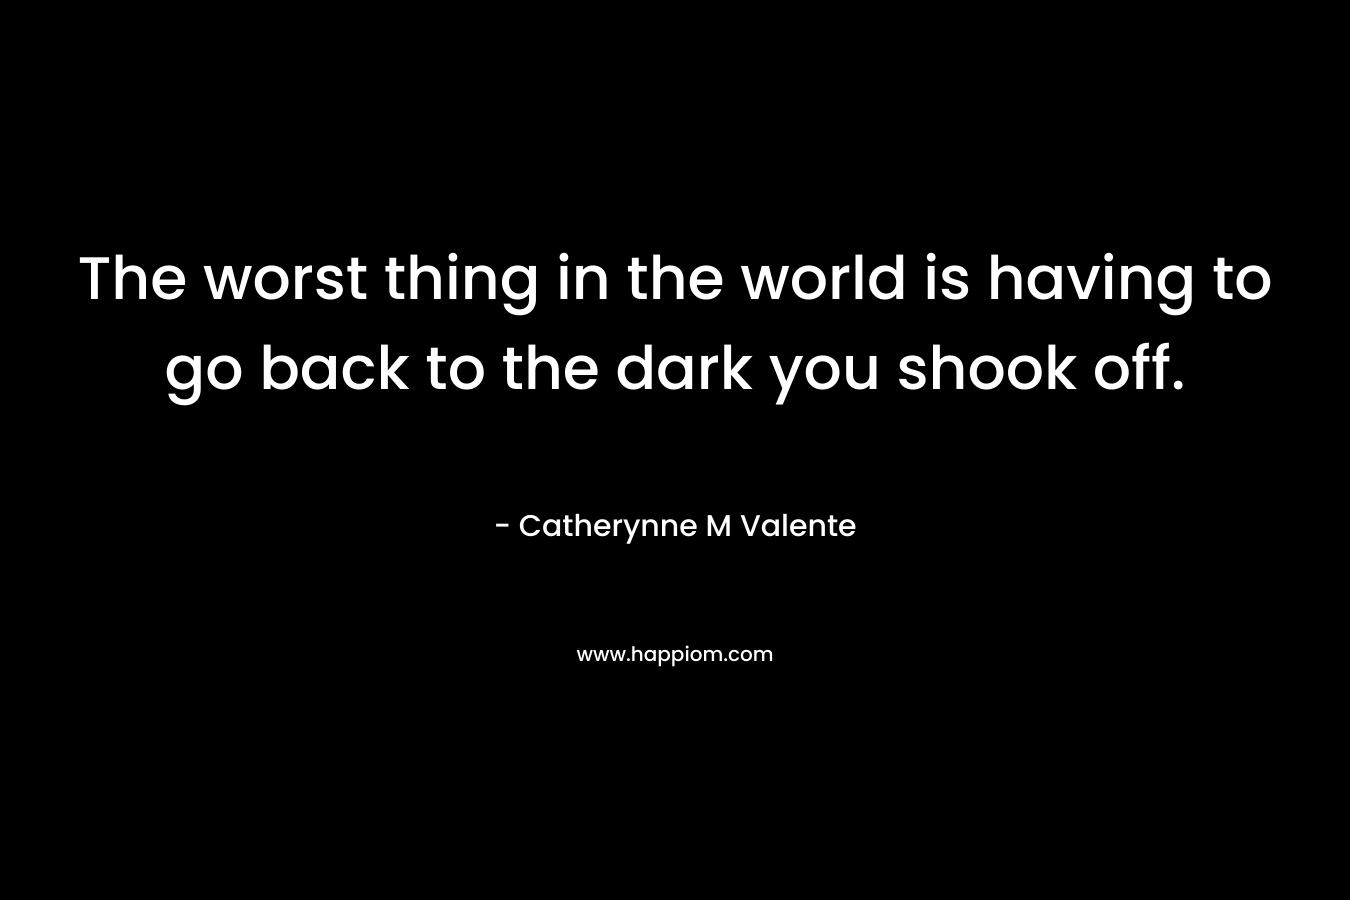 The worst thing in the world is having to go back to the dark you shook off. – Catherynne M Valente